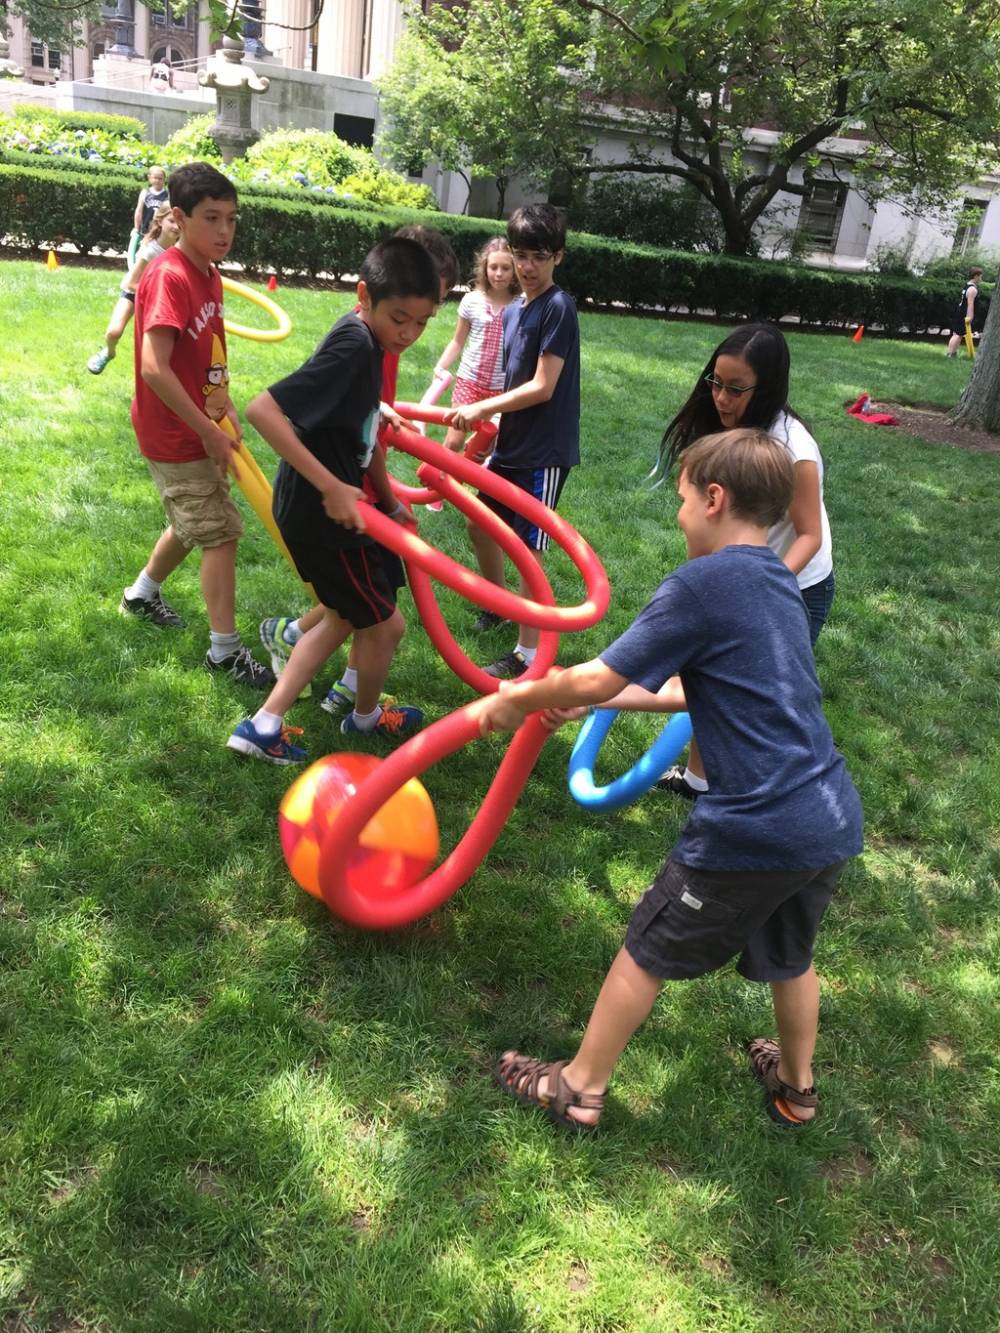 TOP NEW YORK SUMMER CAMP: Columbia University - Little Lions Camp is a Top Summer Camp located in New York New York offering many fun and enriching camp programs. 